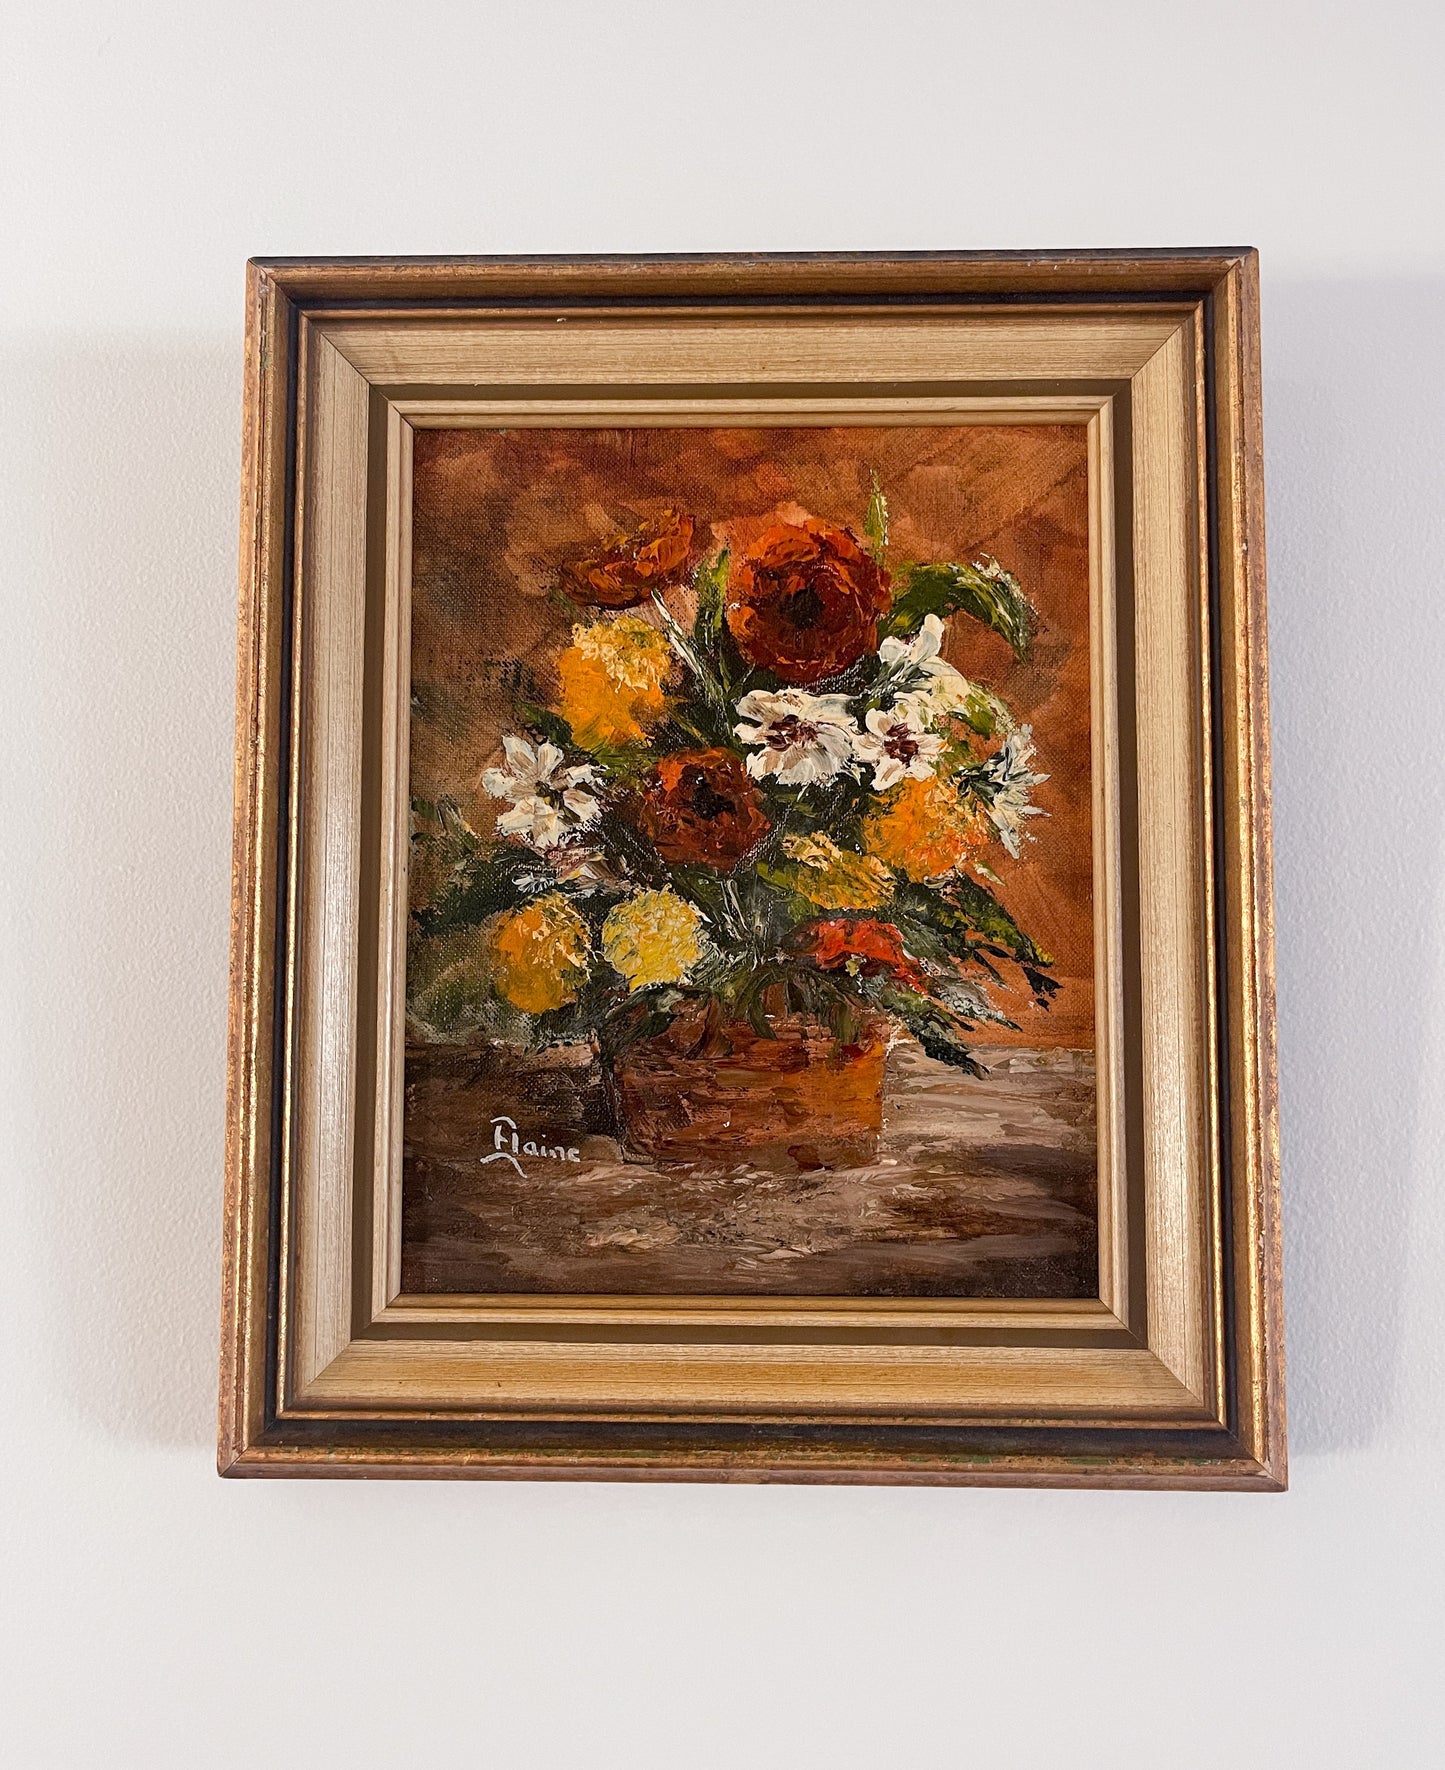 Vintage Still Life Autumnal Floral Painting by Elaine